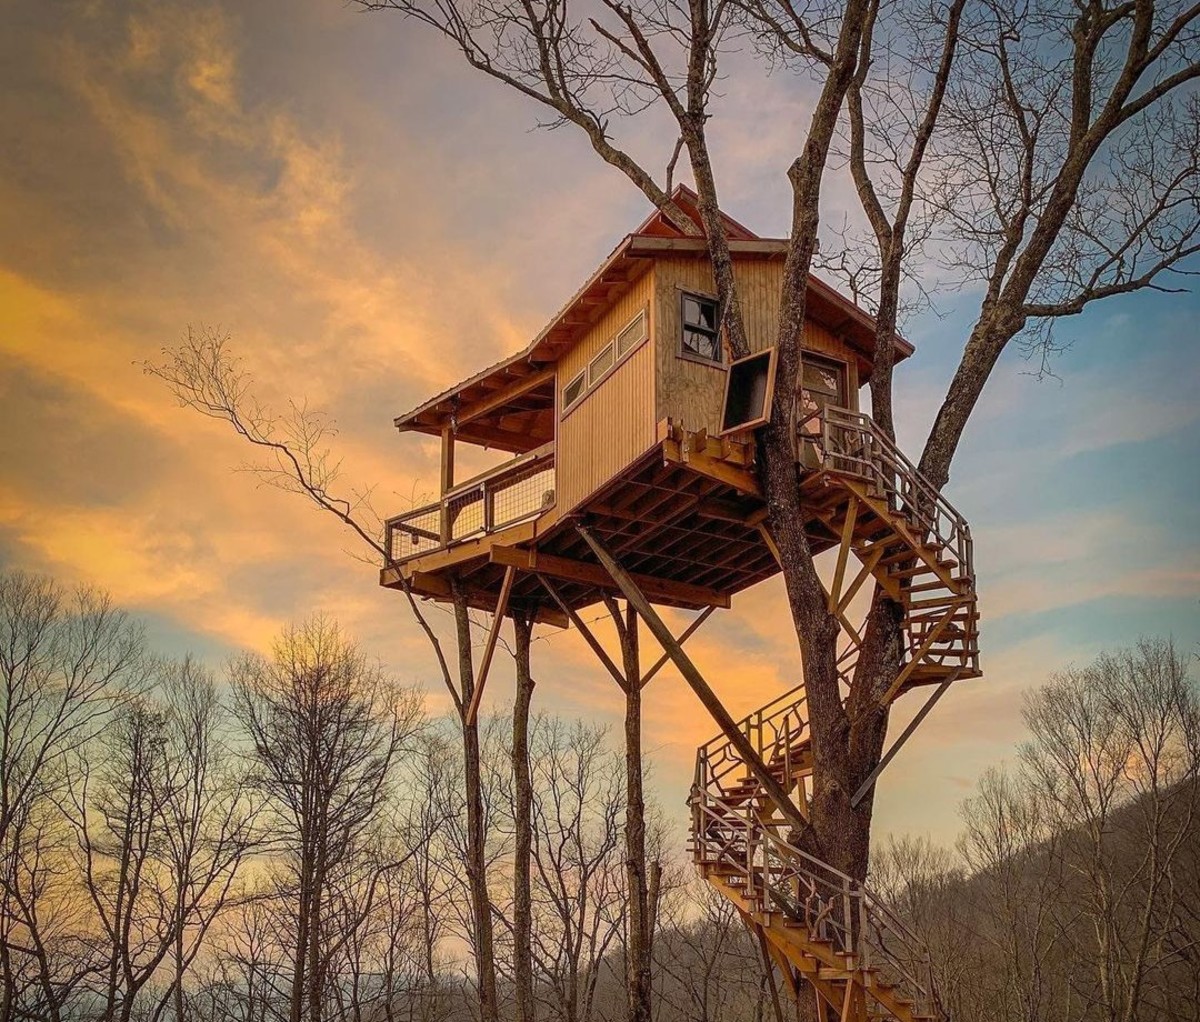 Raven Rock Treehouse from Airbnb's Instagram account